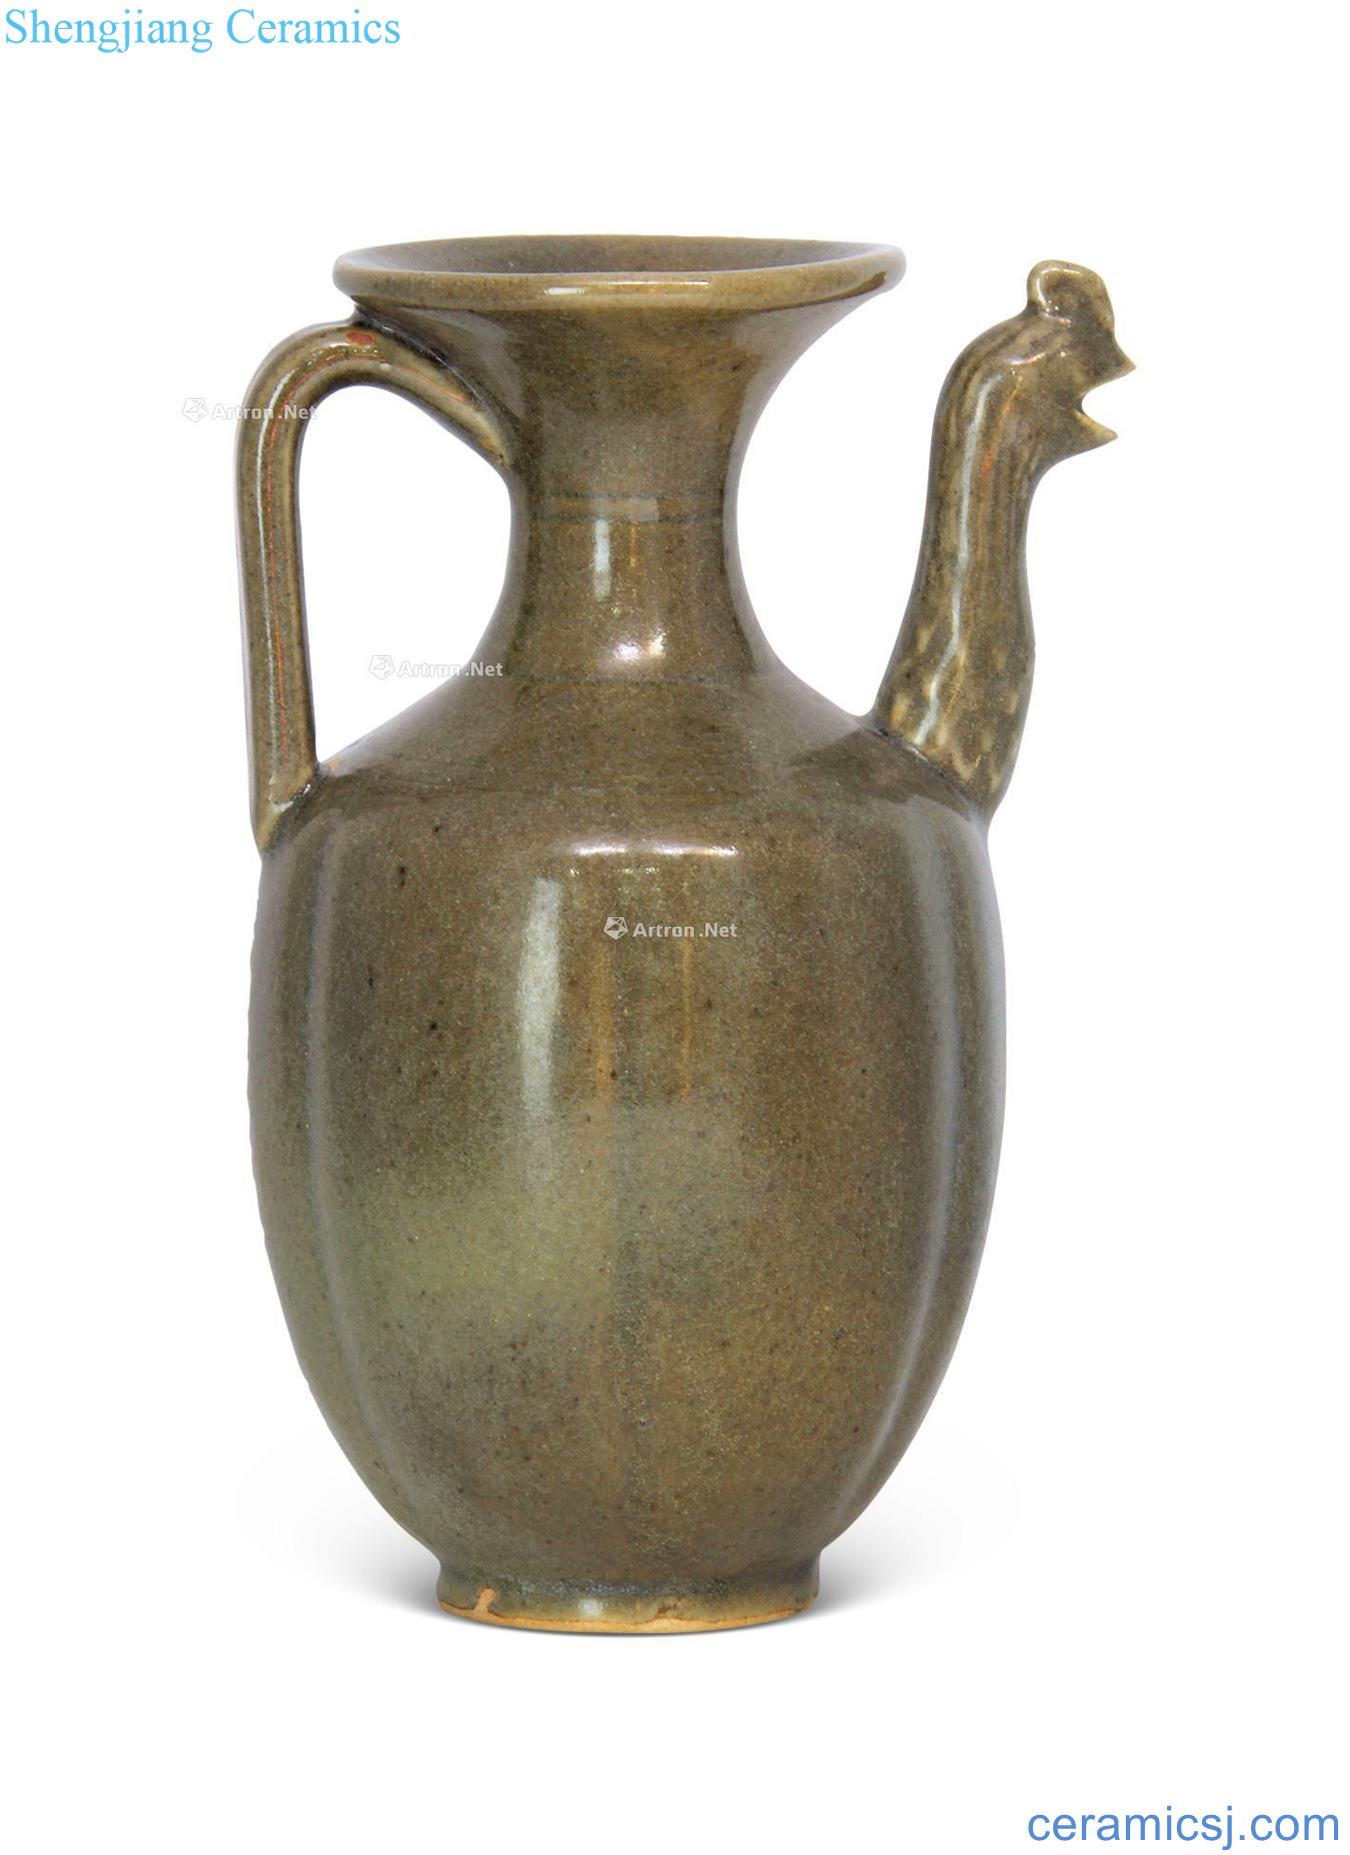 The song dynasty Kiln chicken first ewer